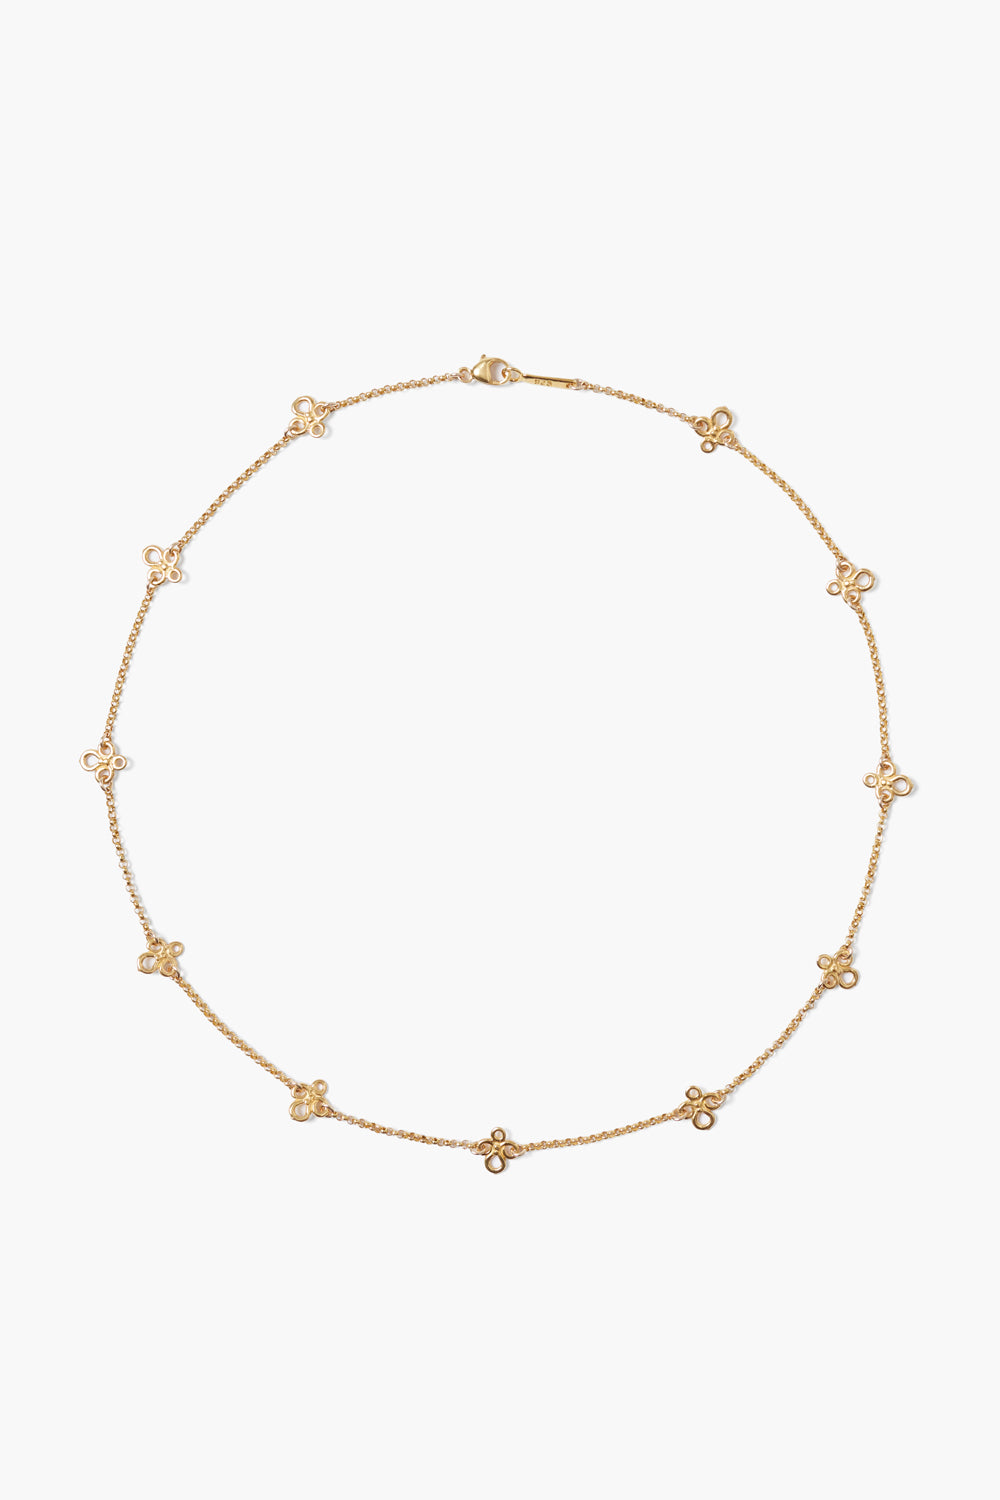 YELLOW GOLD CHAIN NECKLACE - Kingfisher Road - Online Boutique